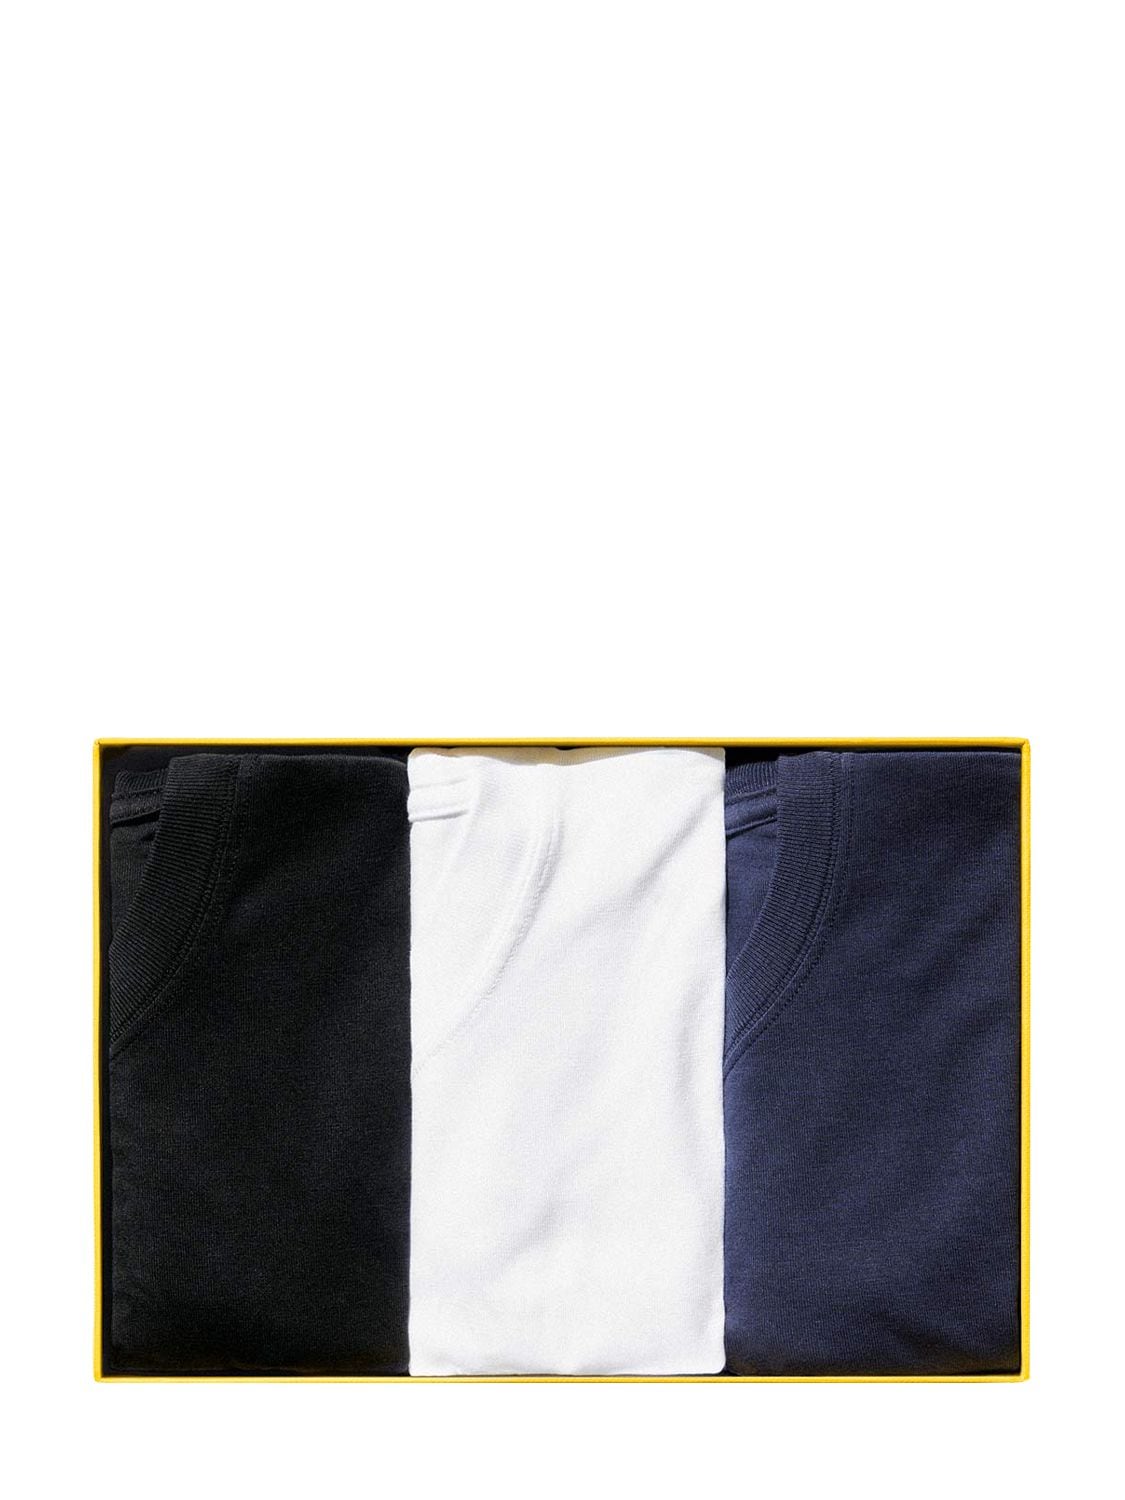 Cdlp Pack Of 3 Lyocell & Cotton T-shirts In Black,navy,whit